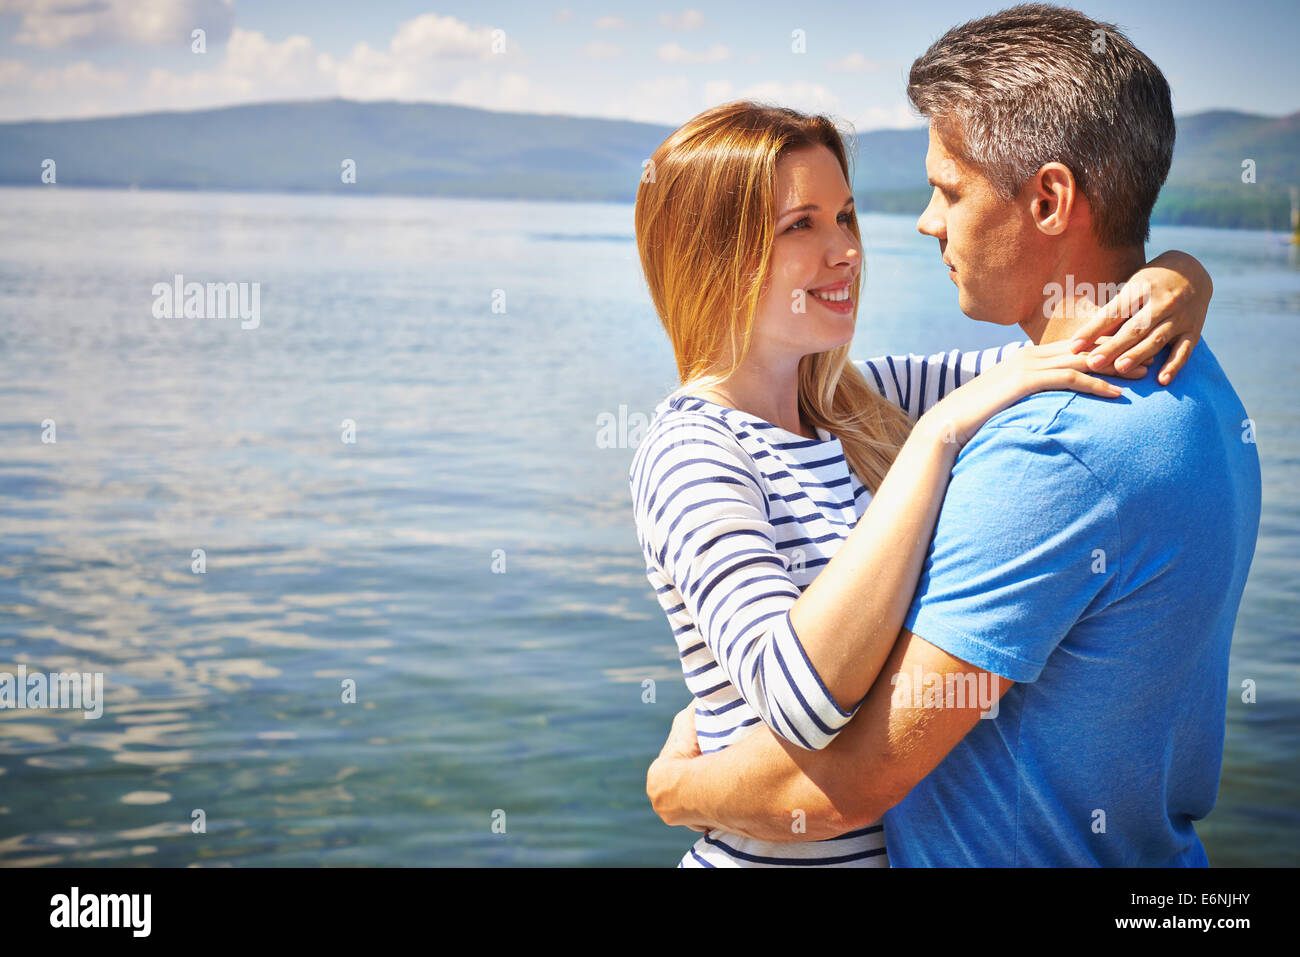 Amorous man and woman standing in embrace by lake Stock Photo